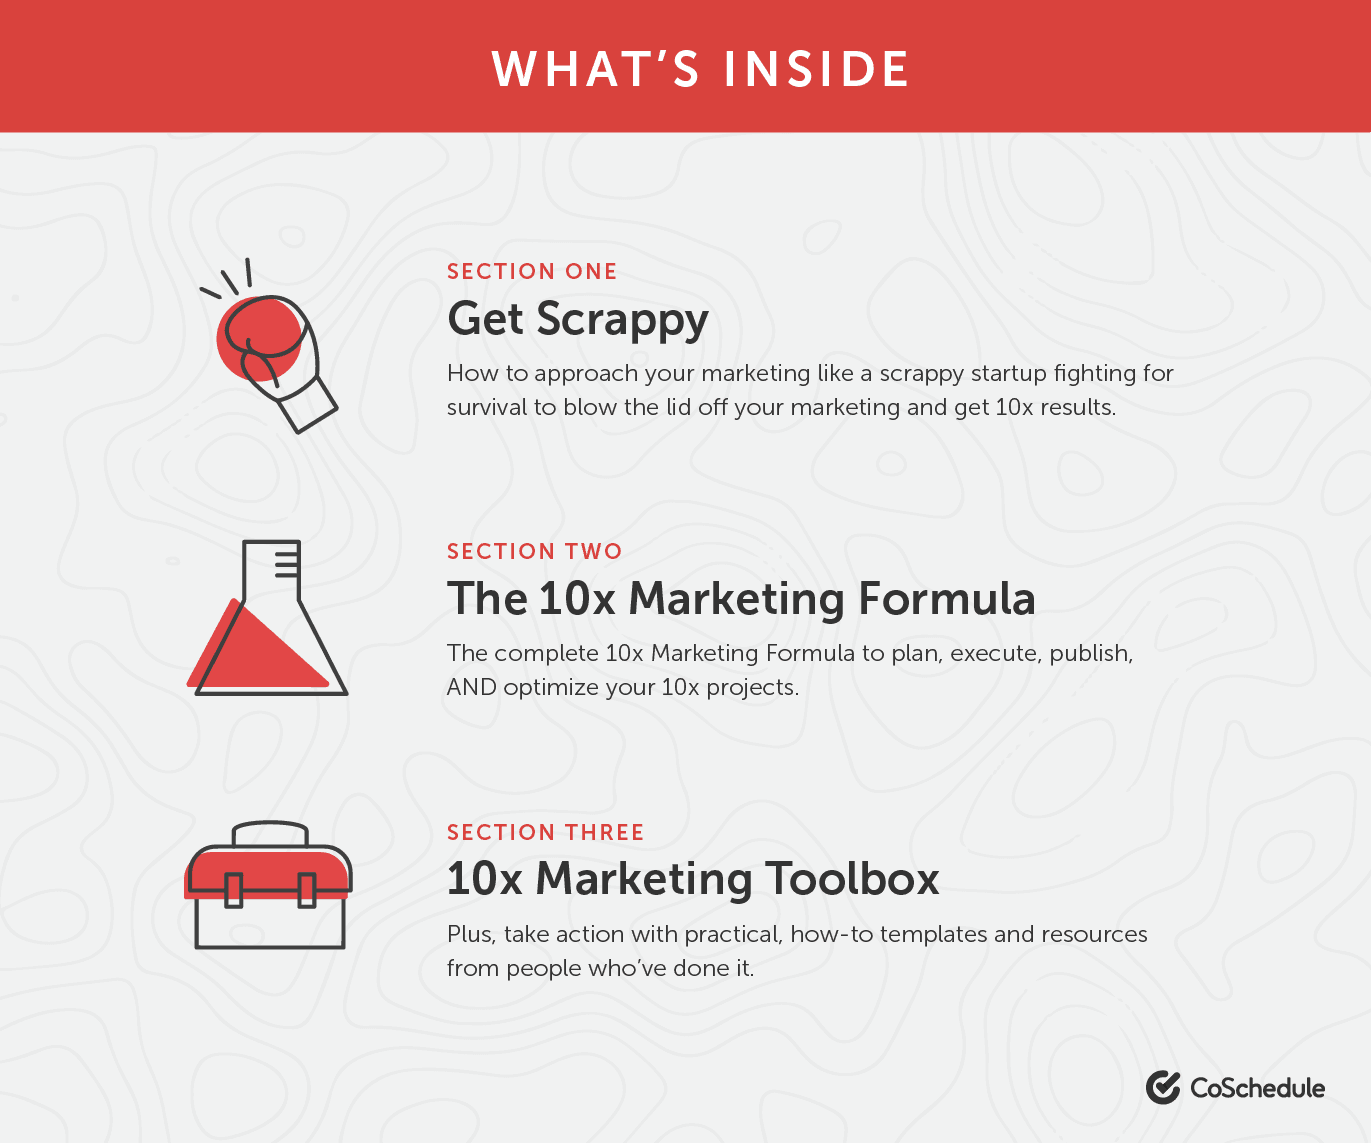 What's Inside the 10x Marketing book. 